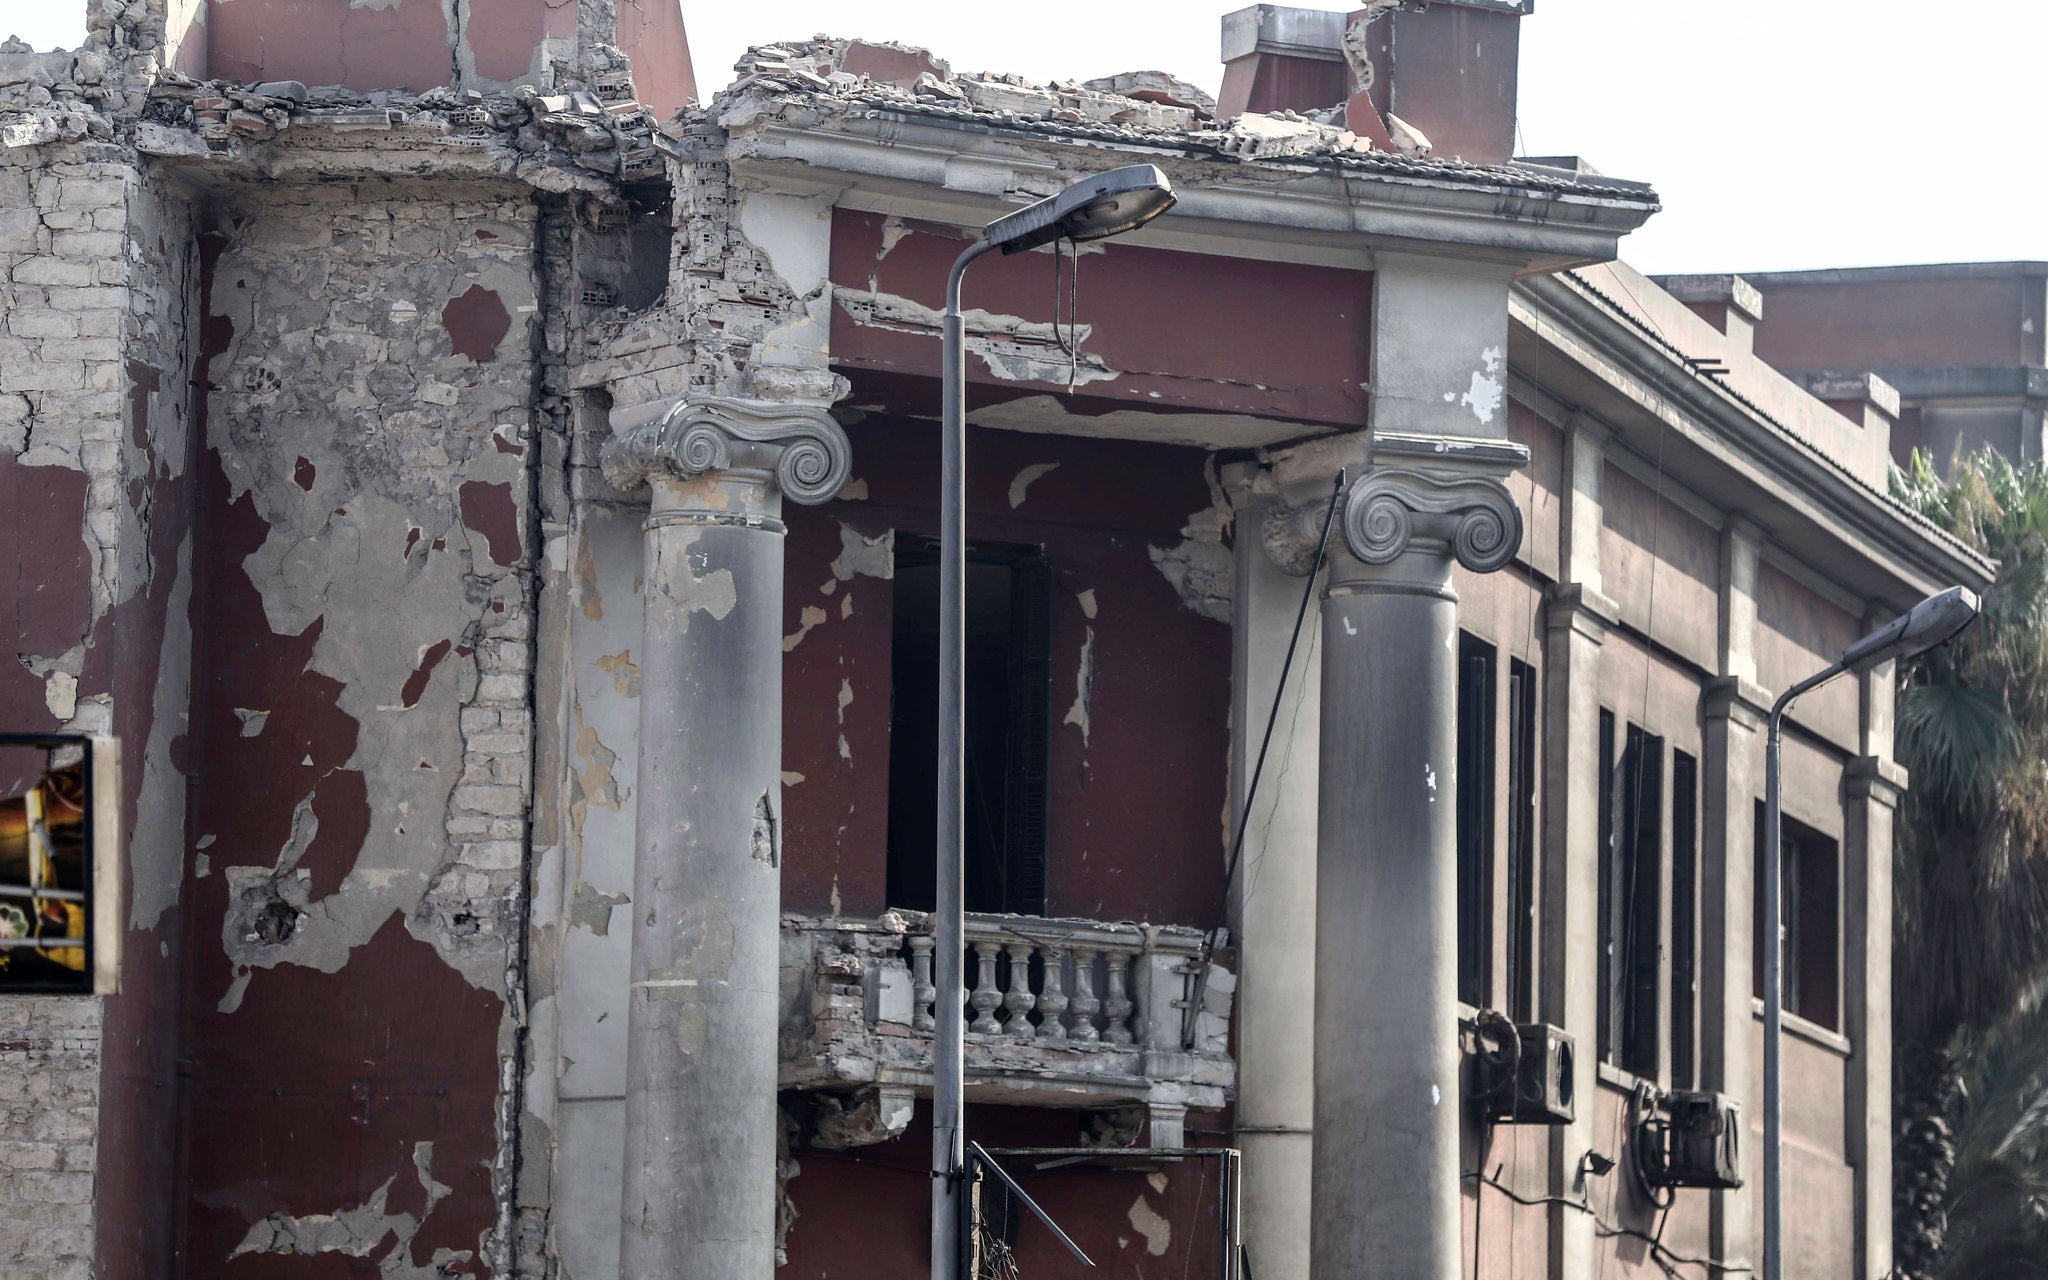 The red-facaded Italian Consulate was seriously damaged in the early-morning blast